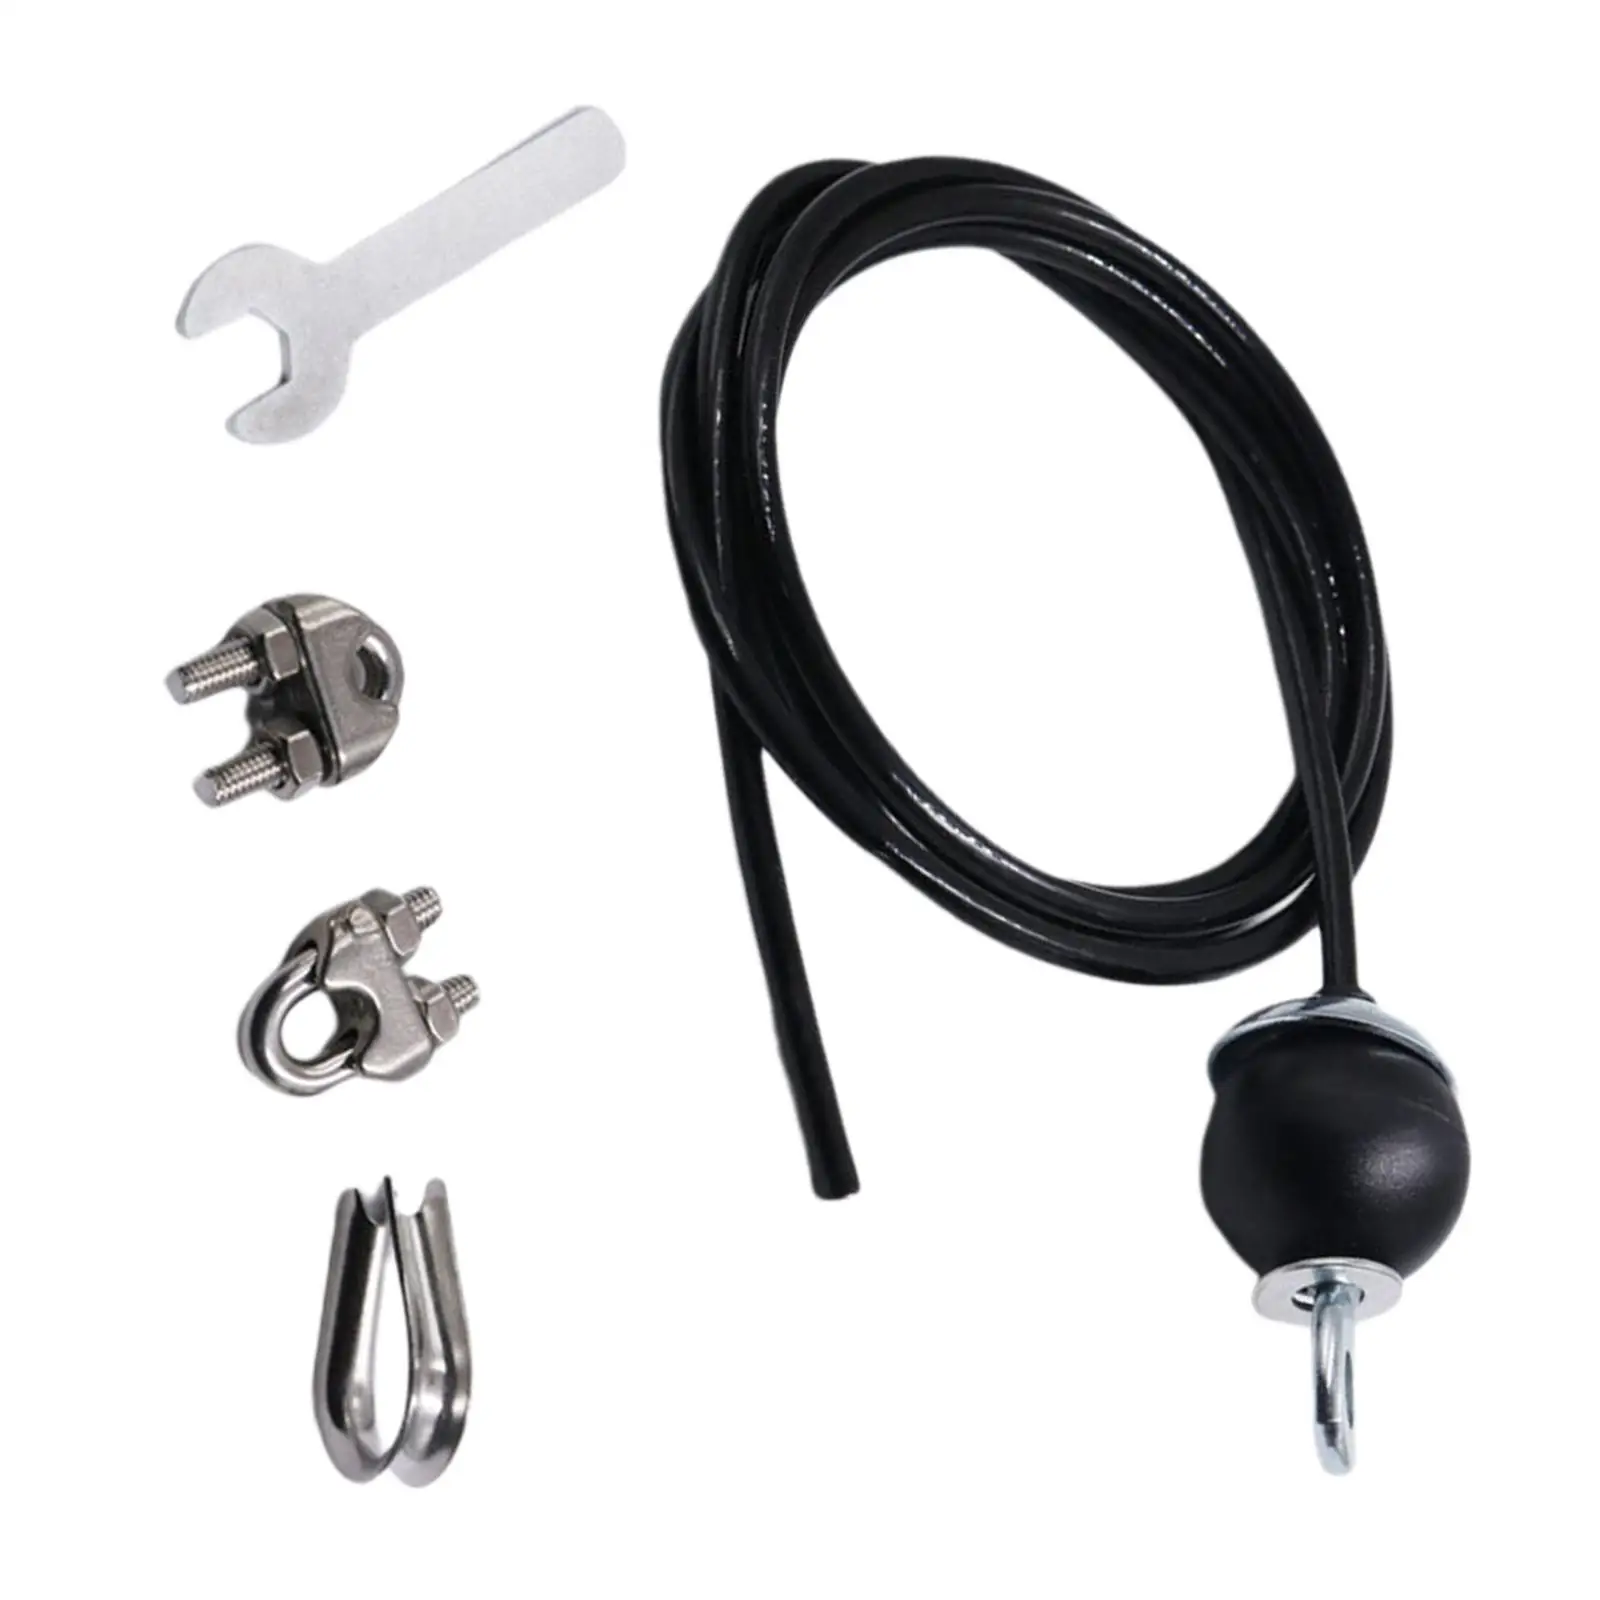 Steel Wire Rope Kit with Rubber Stopper Ball for Pulley System Exercise Accs